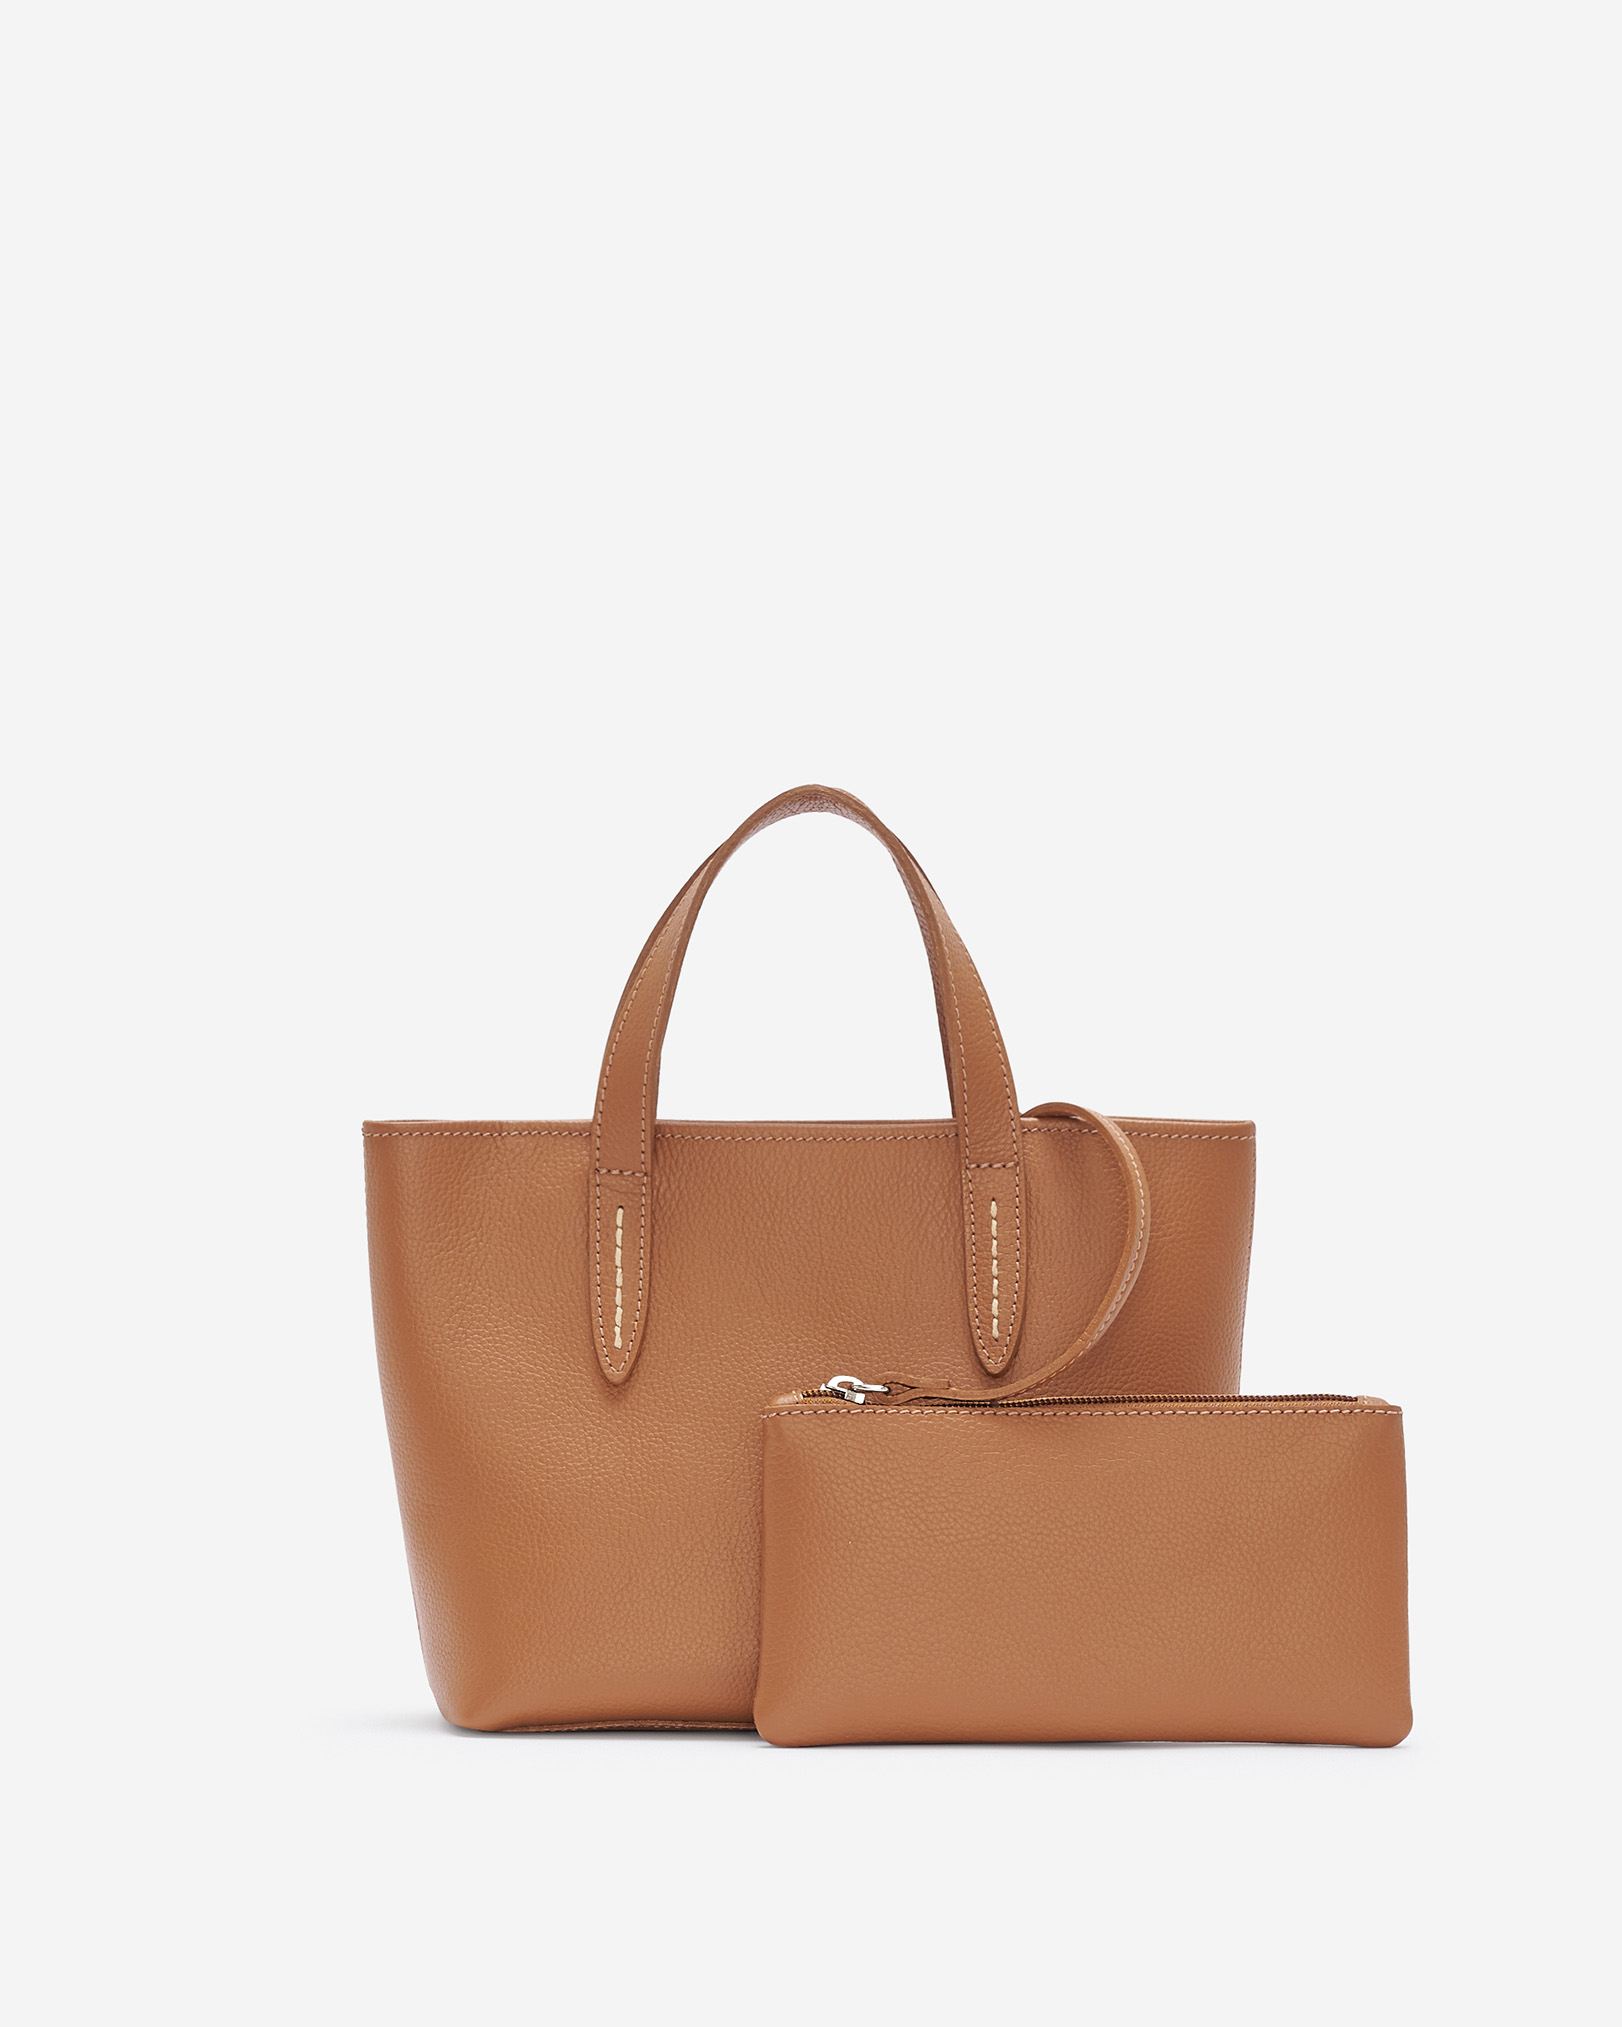 Roots Carryall Crossbody in Tan/Powder Pink